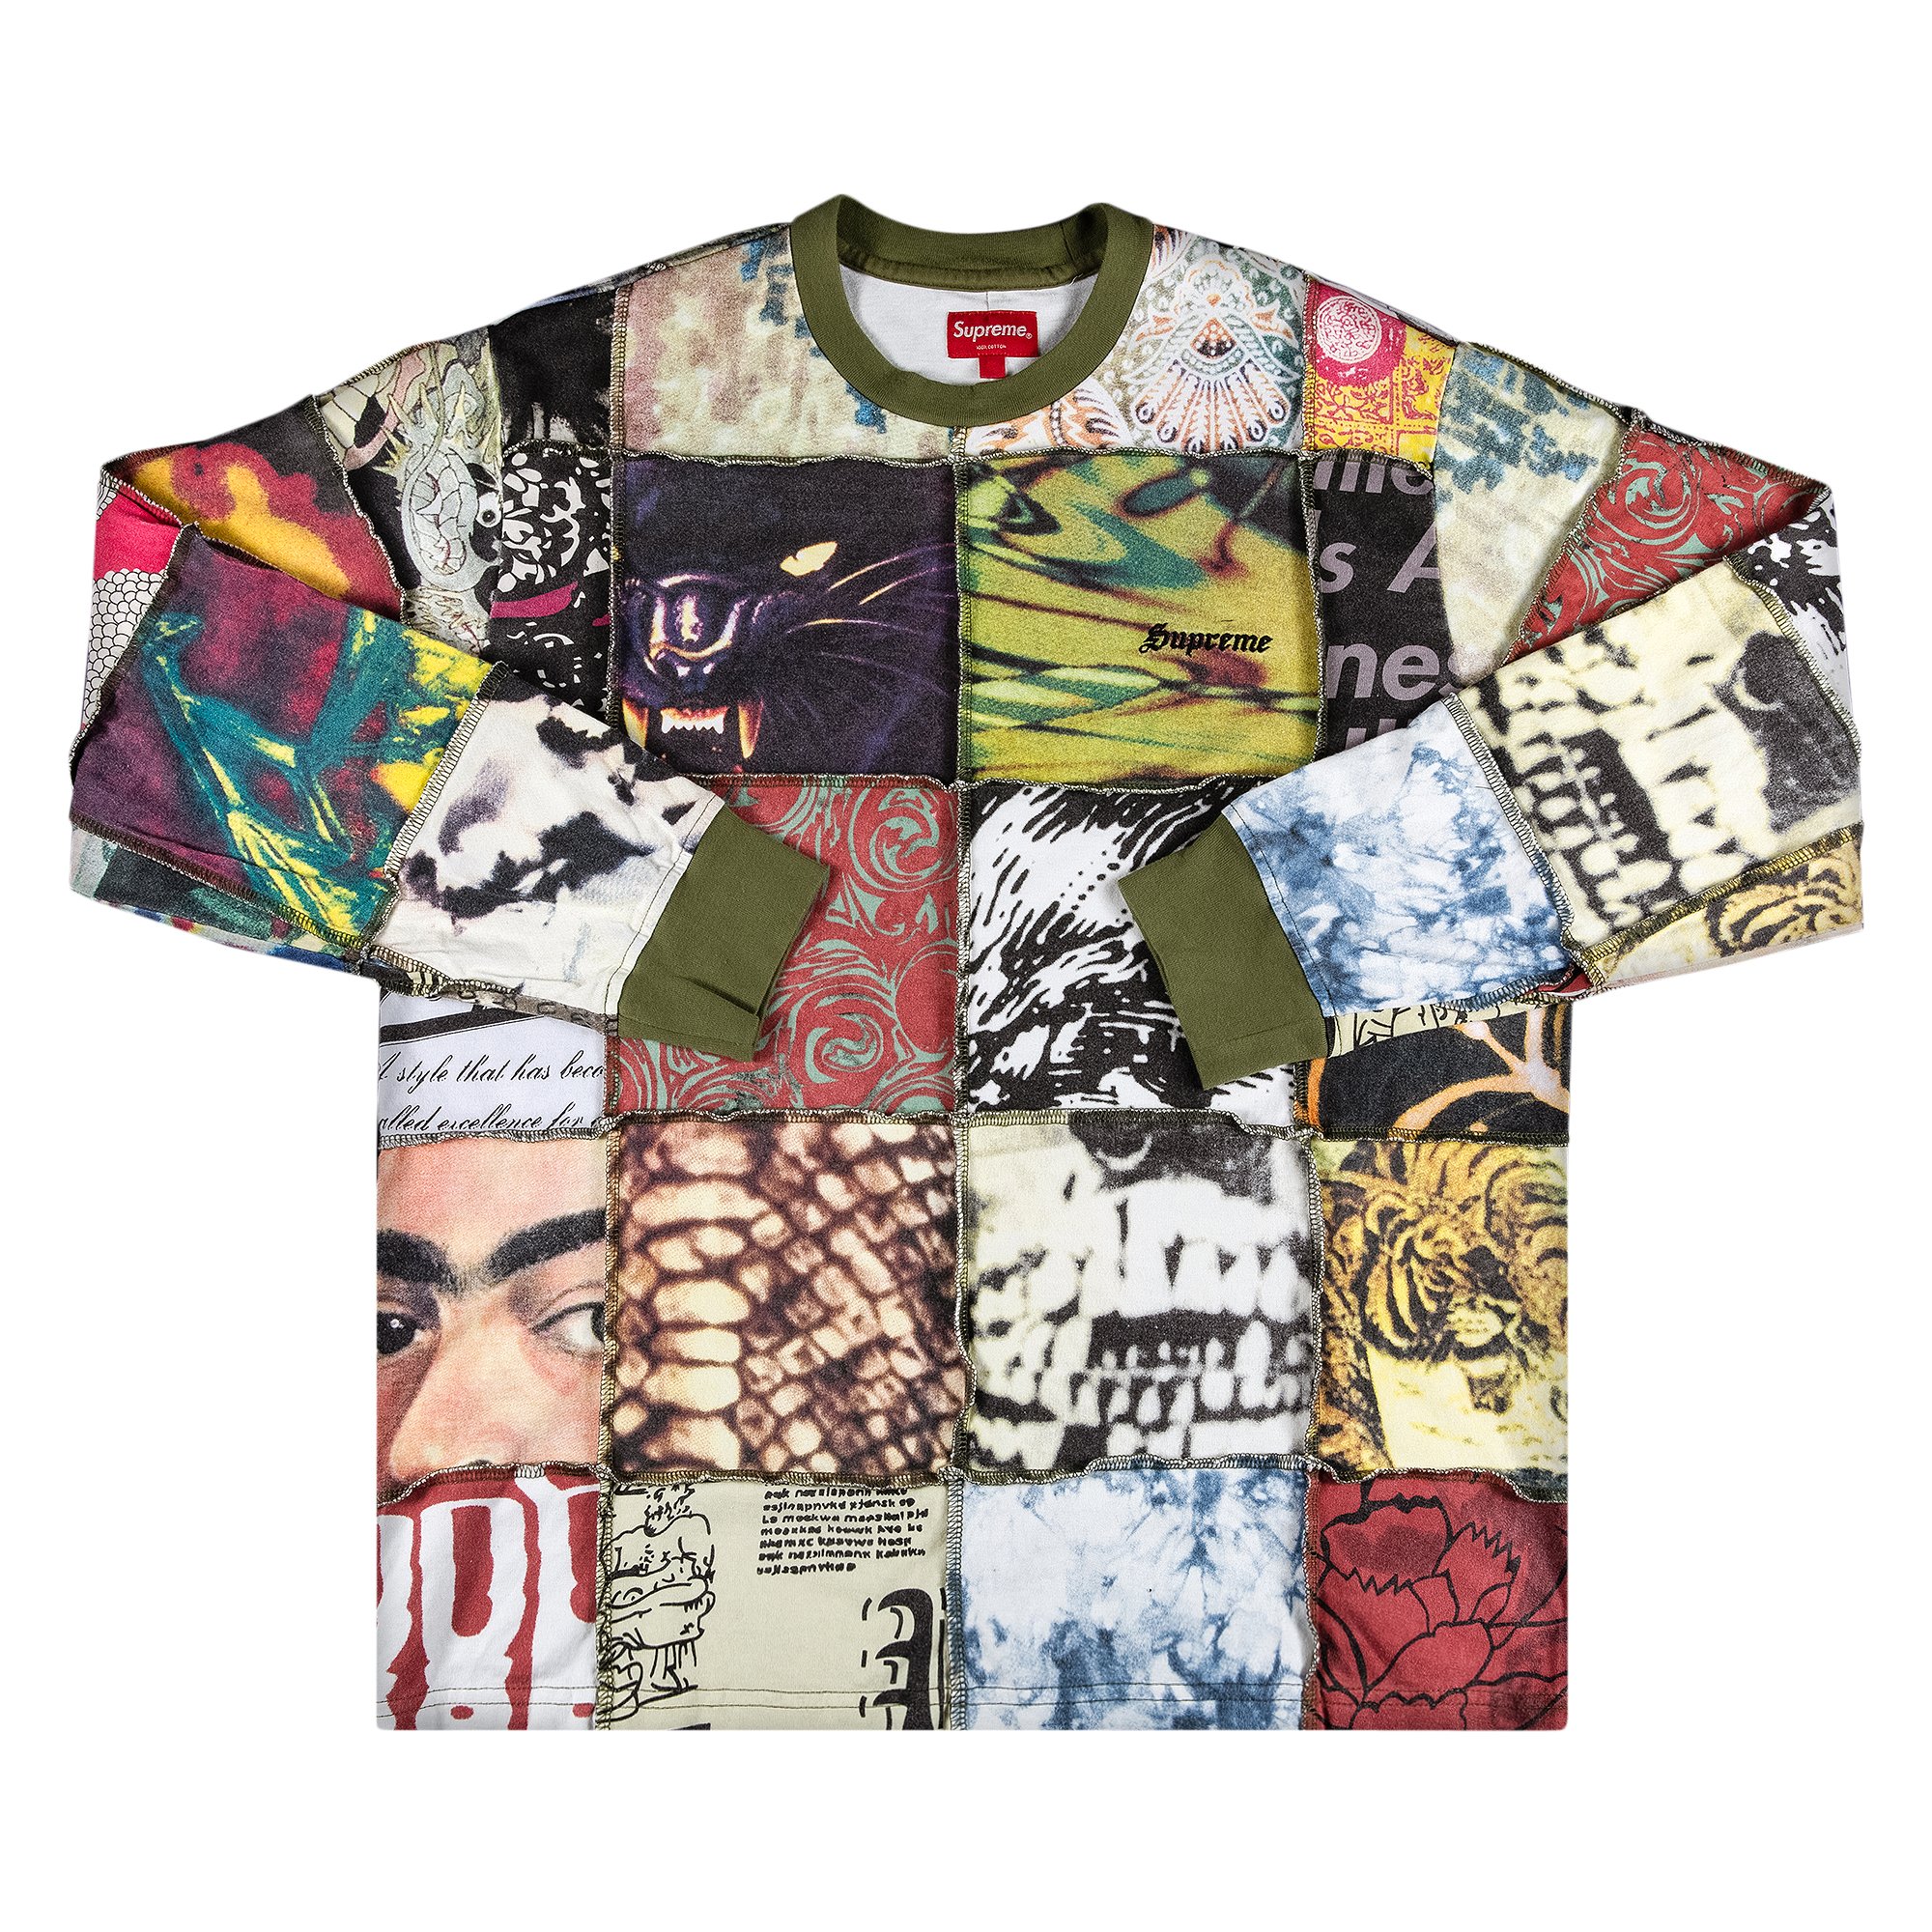 Buy Supreme Mosaic Patchwork Long-Sleeve Top 'Multicolor 